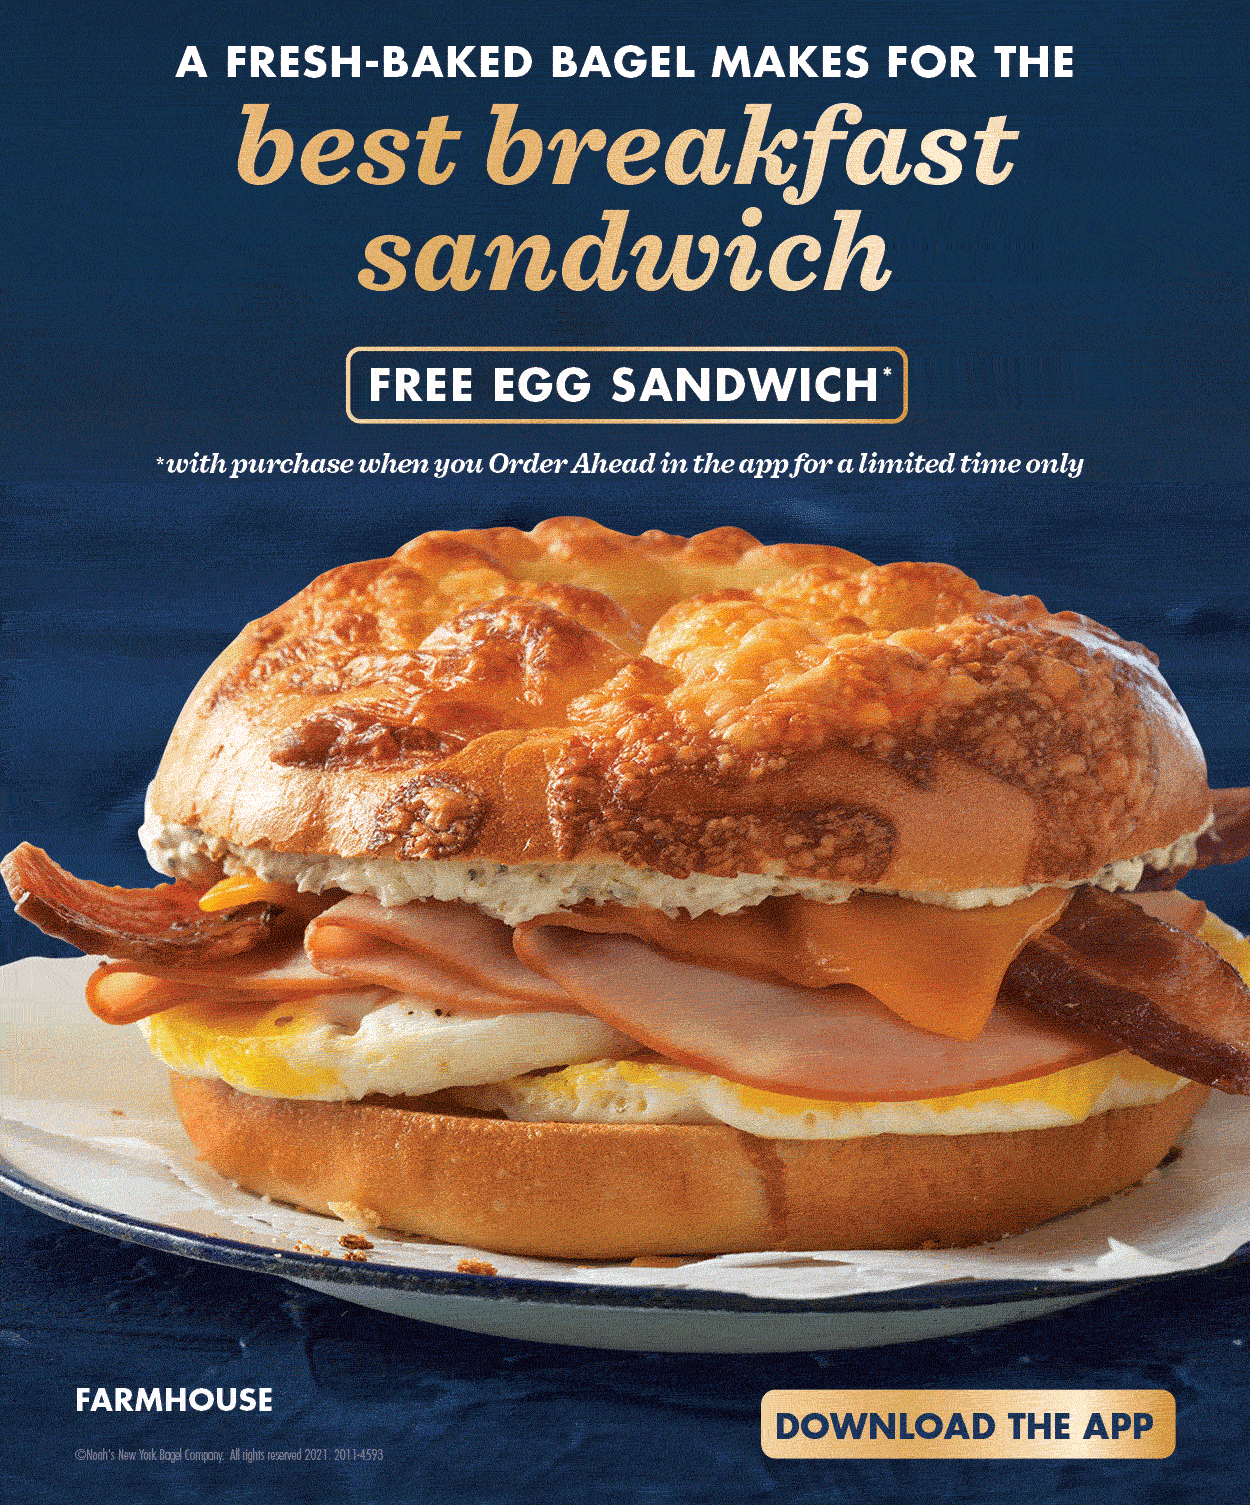 Noahs Bagel Coupon - Reward Members (Free to join): $5 egg sandwich every Friday. 

At participating locations